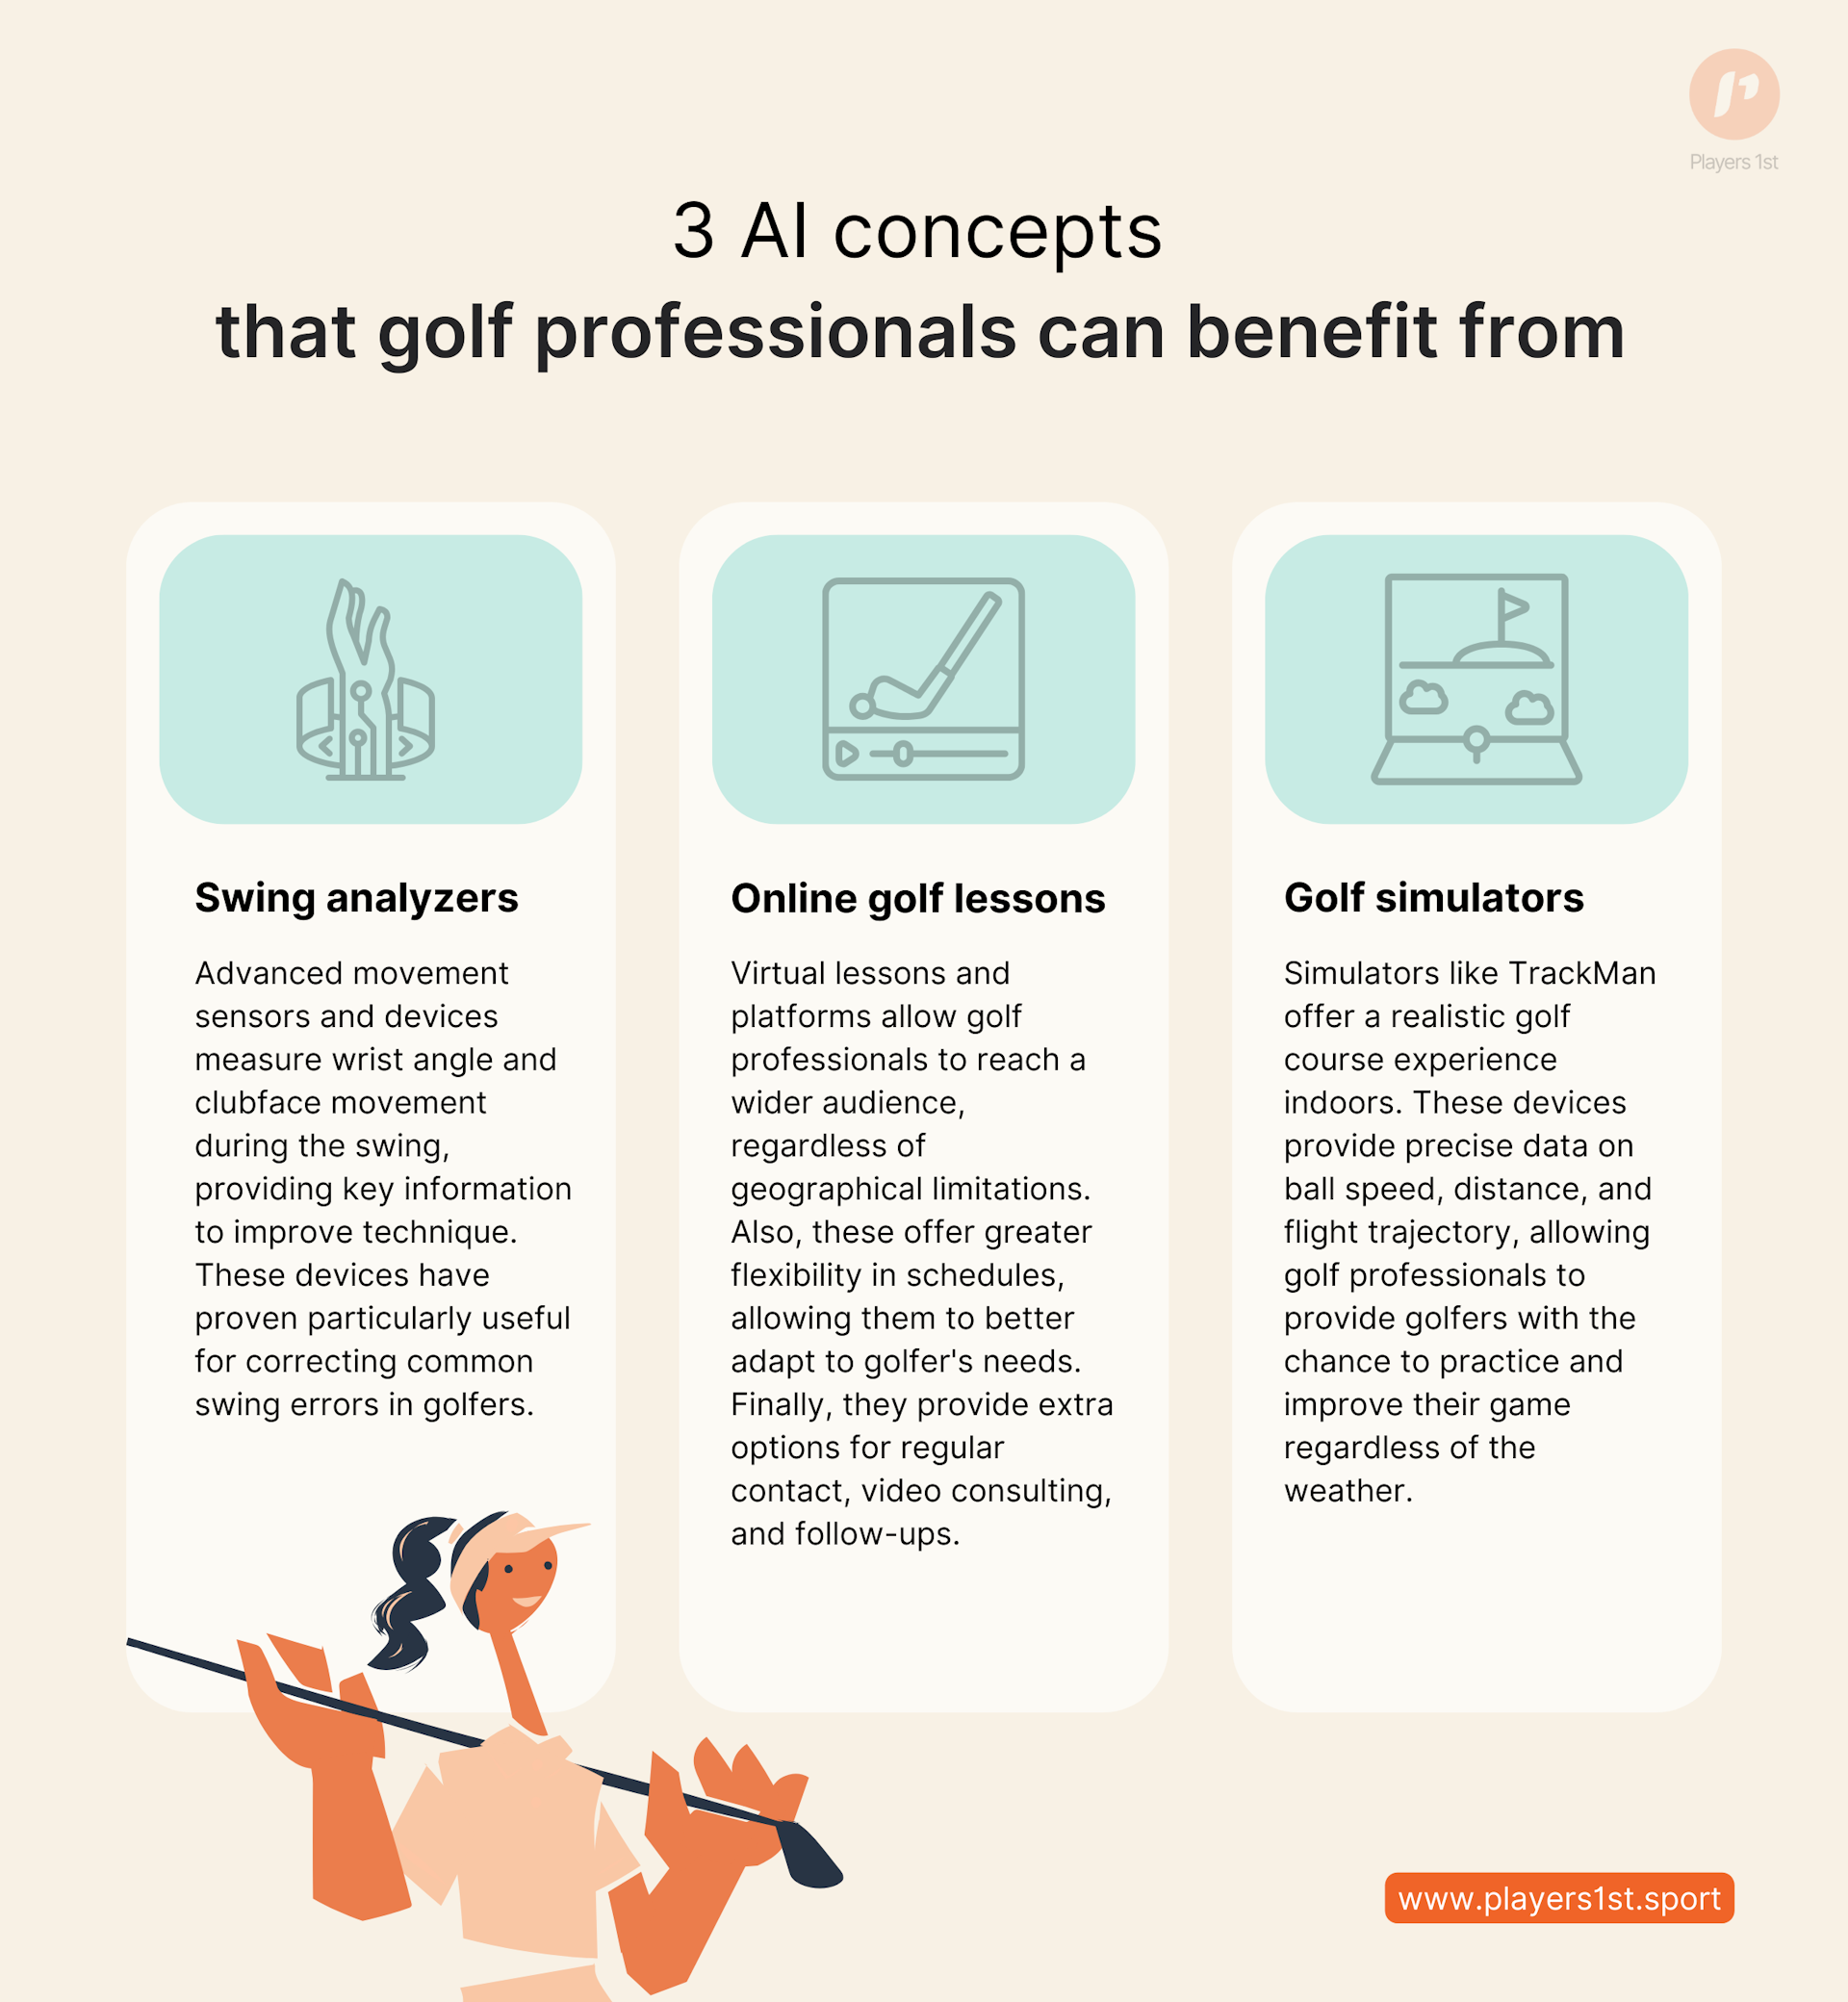 3 AI concepts that golf pros can benefit from